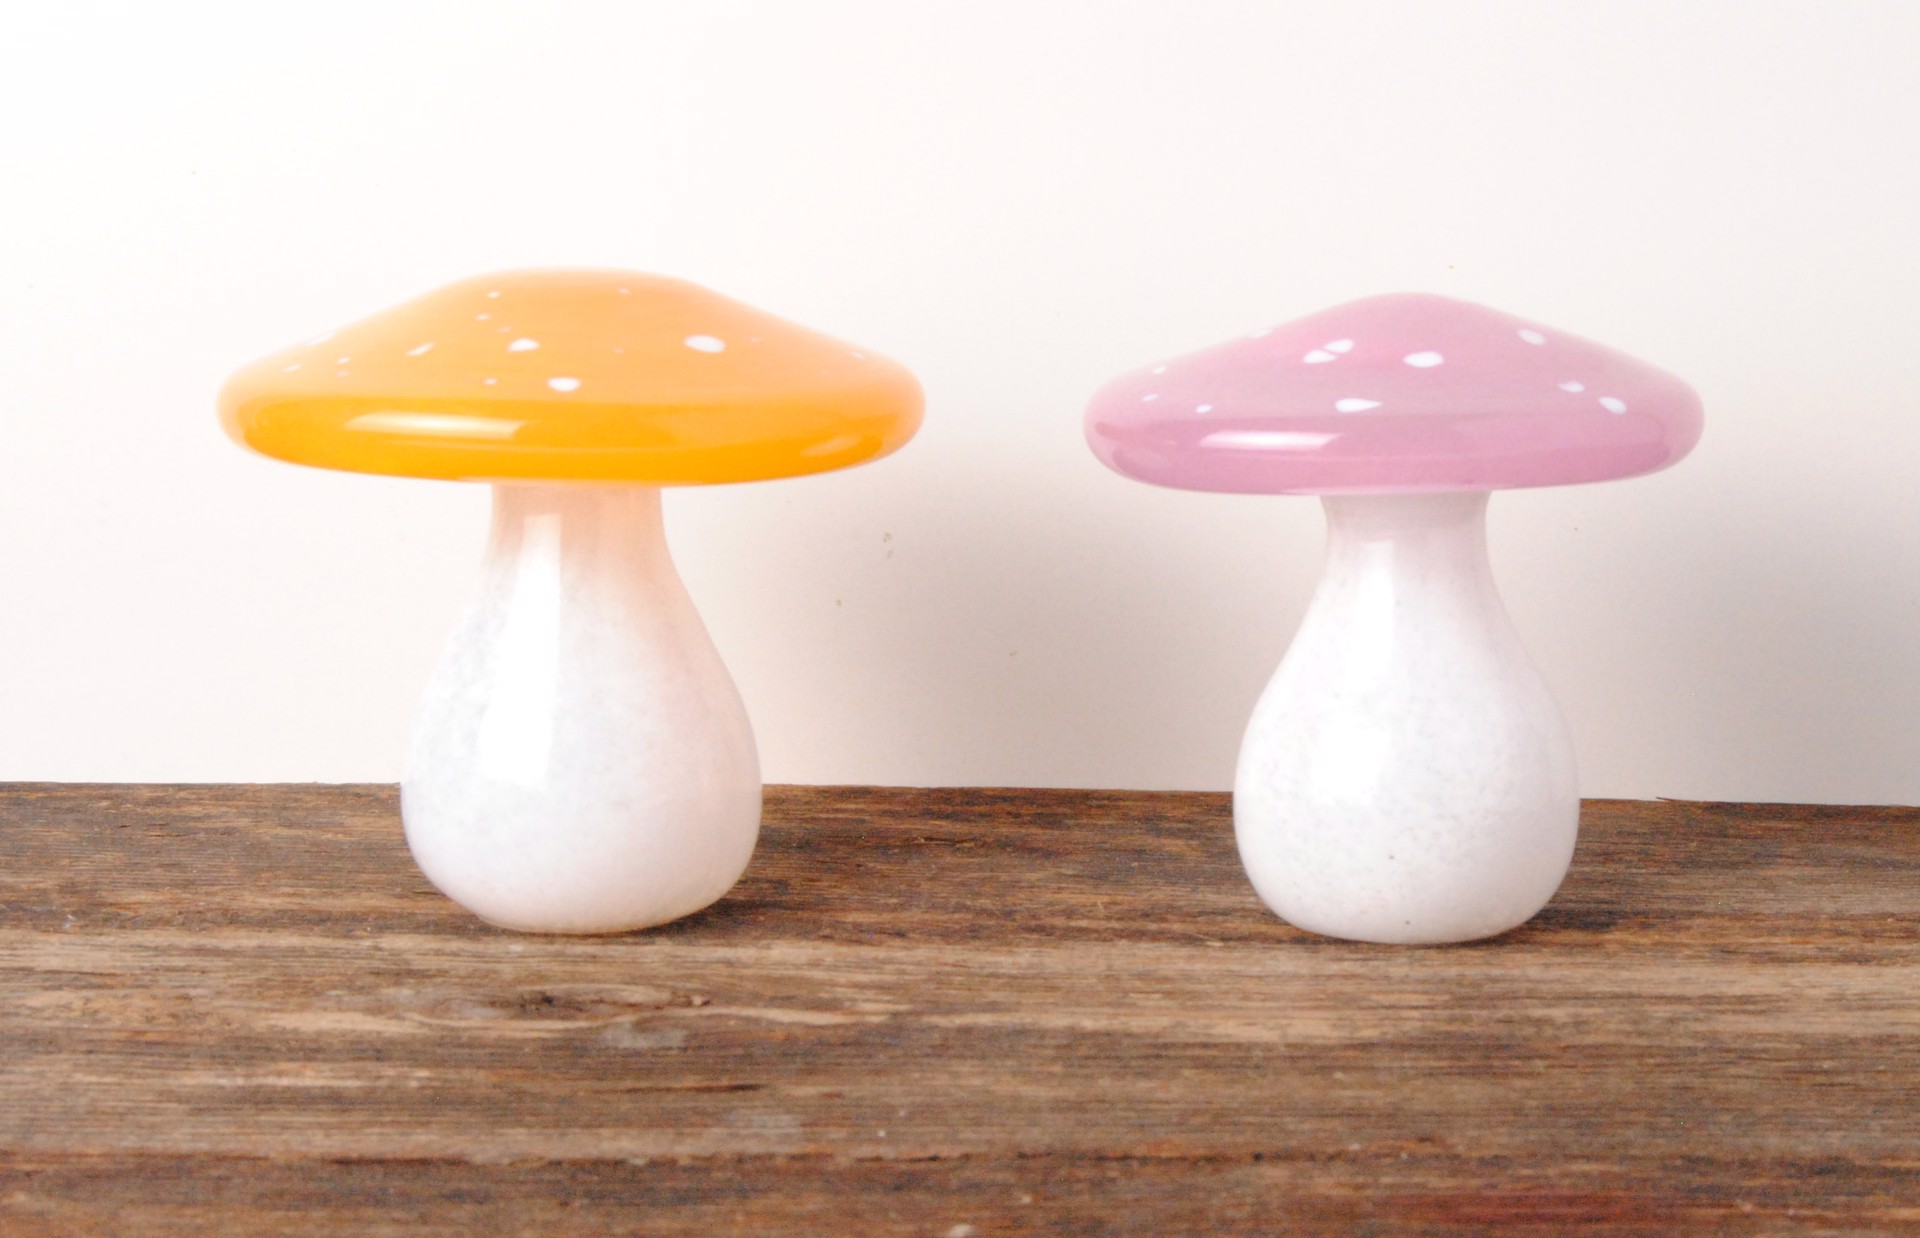 Glass Mushrooms by Courtney Downman